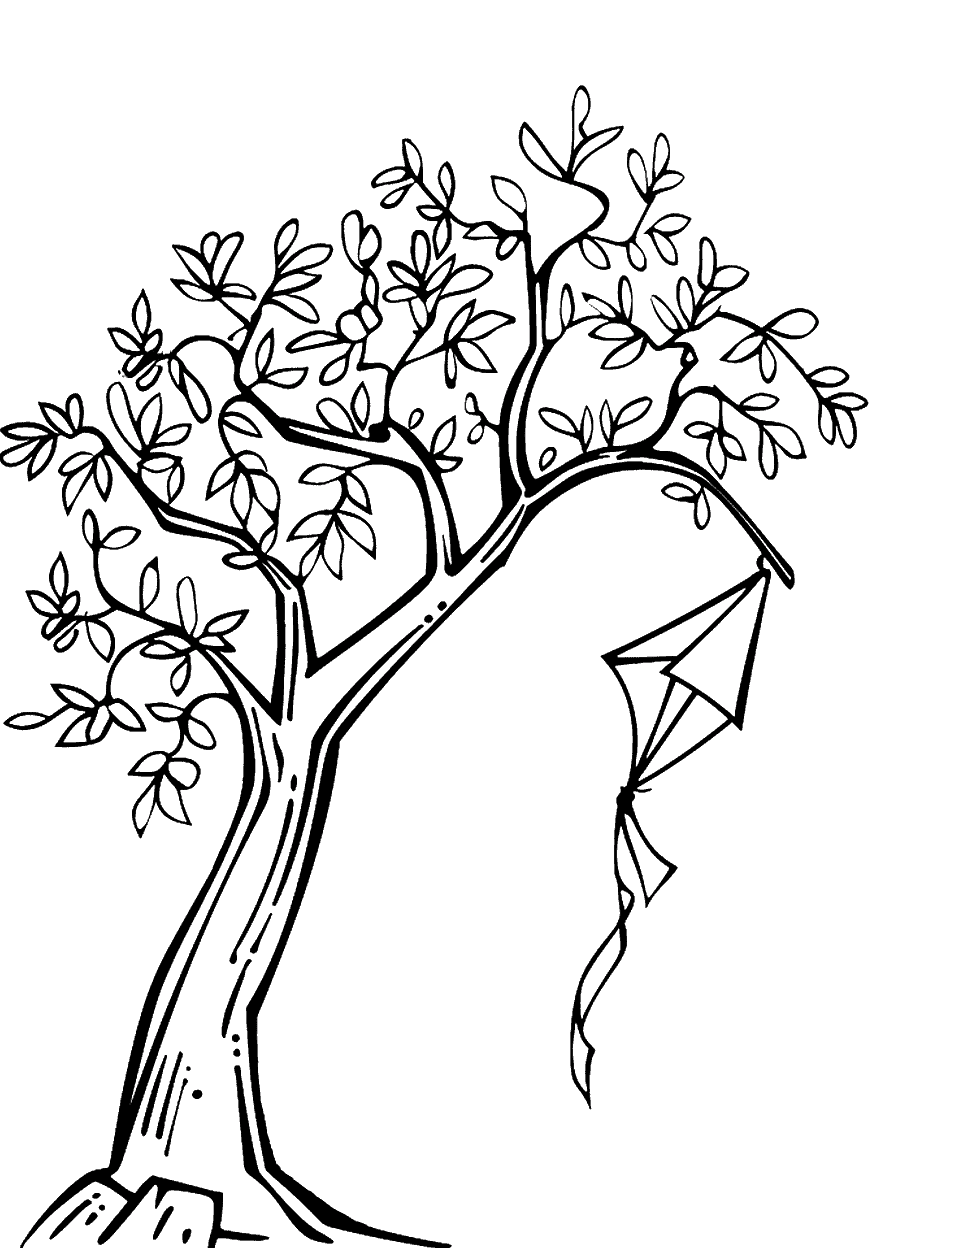 Kite Stuck in a Tree Coloring Page - A kite caught in the branches of a tree.